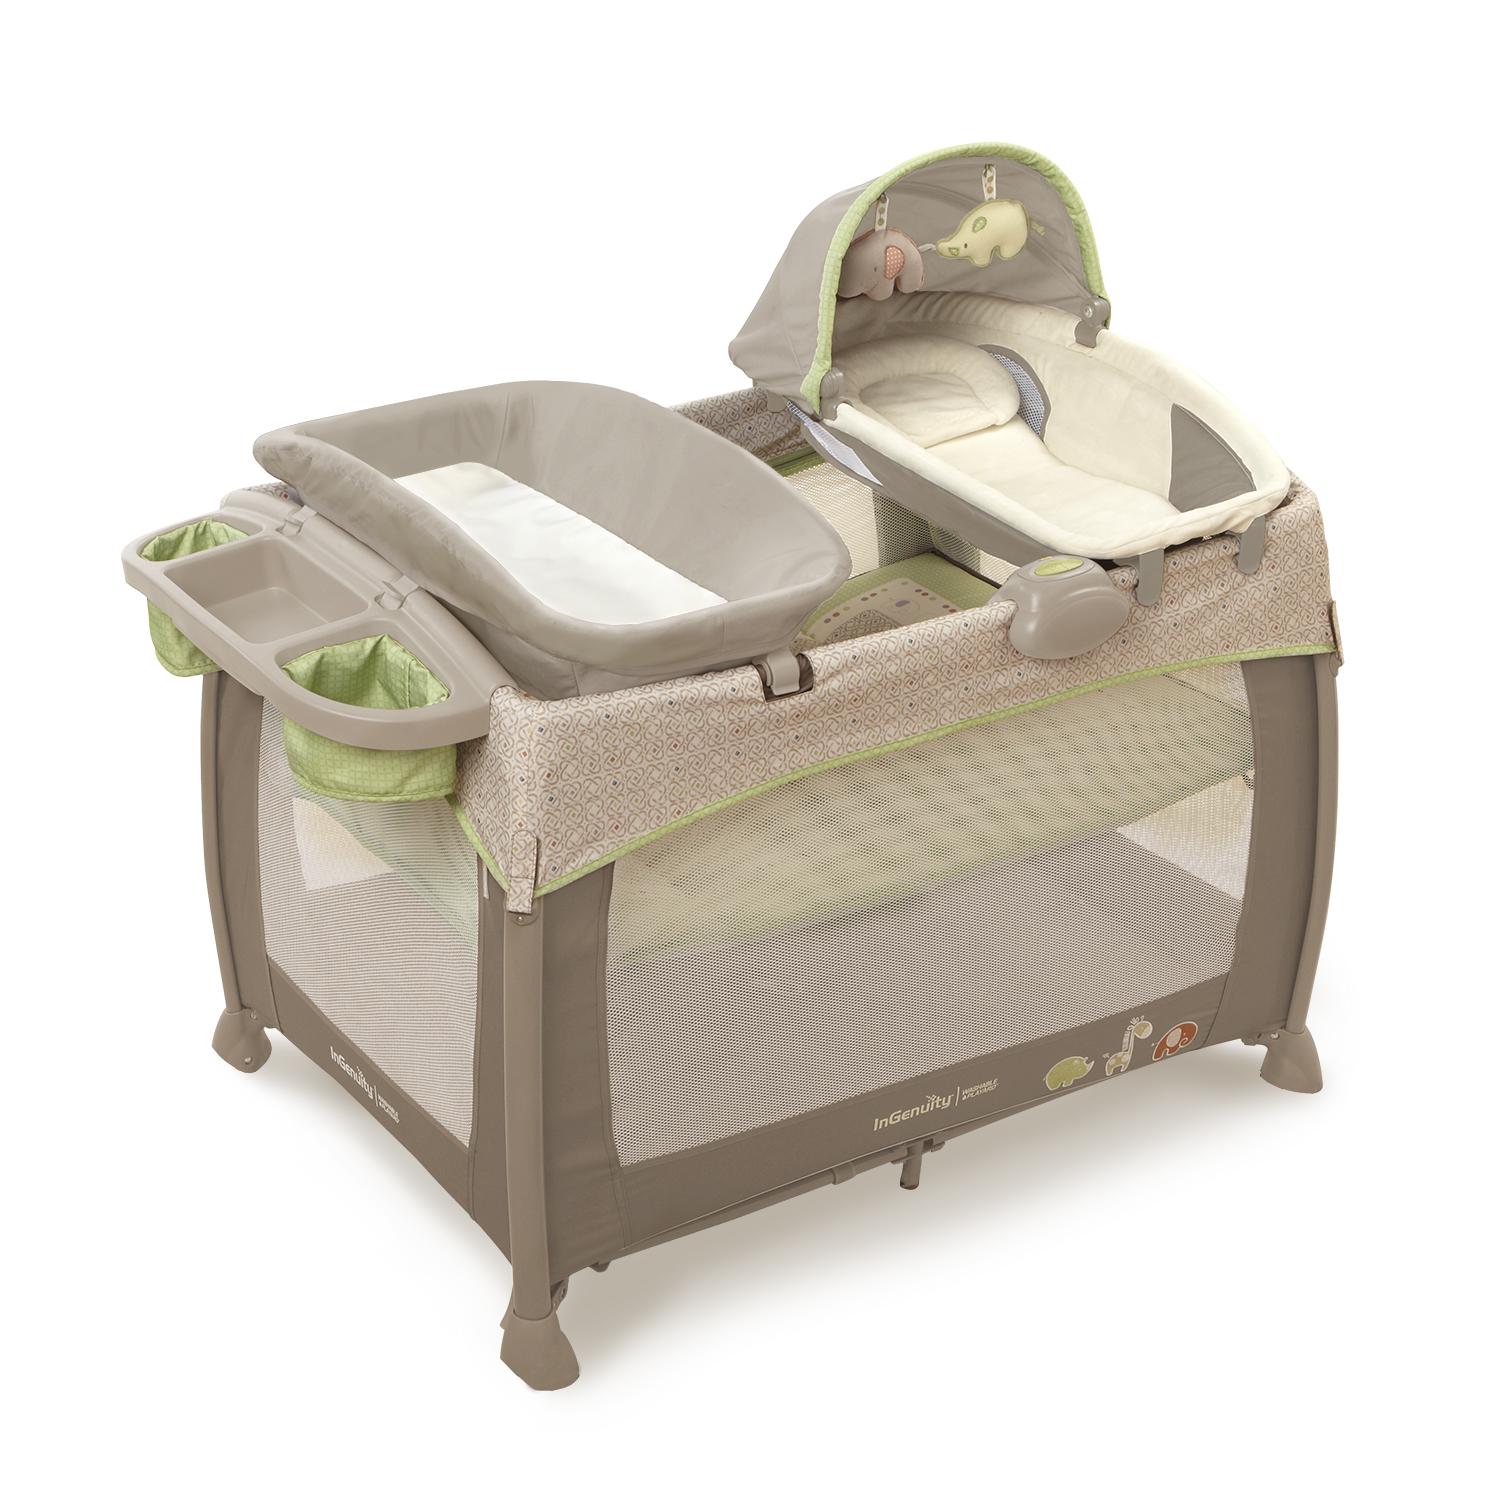 Jeep pack and go baby crib #3